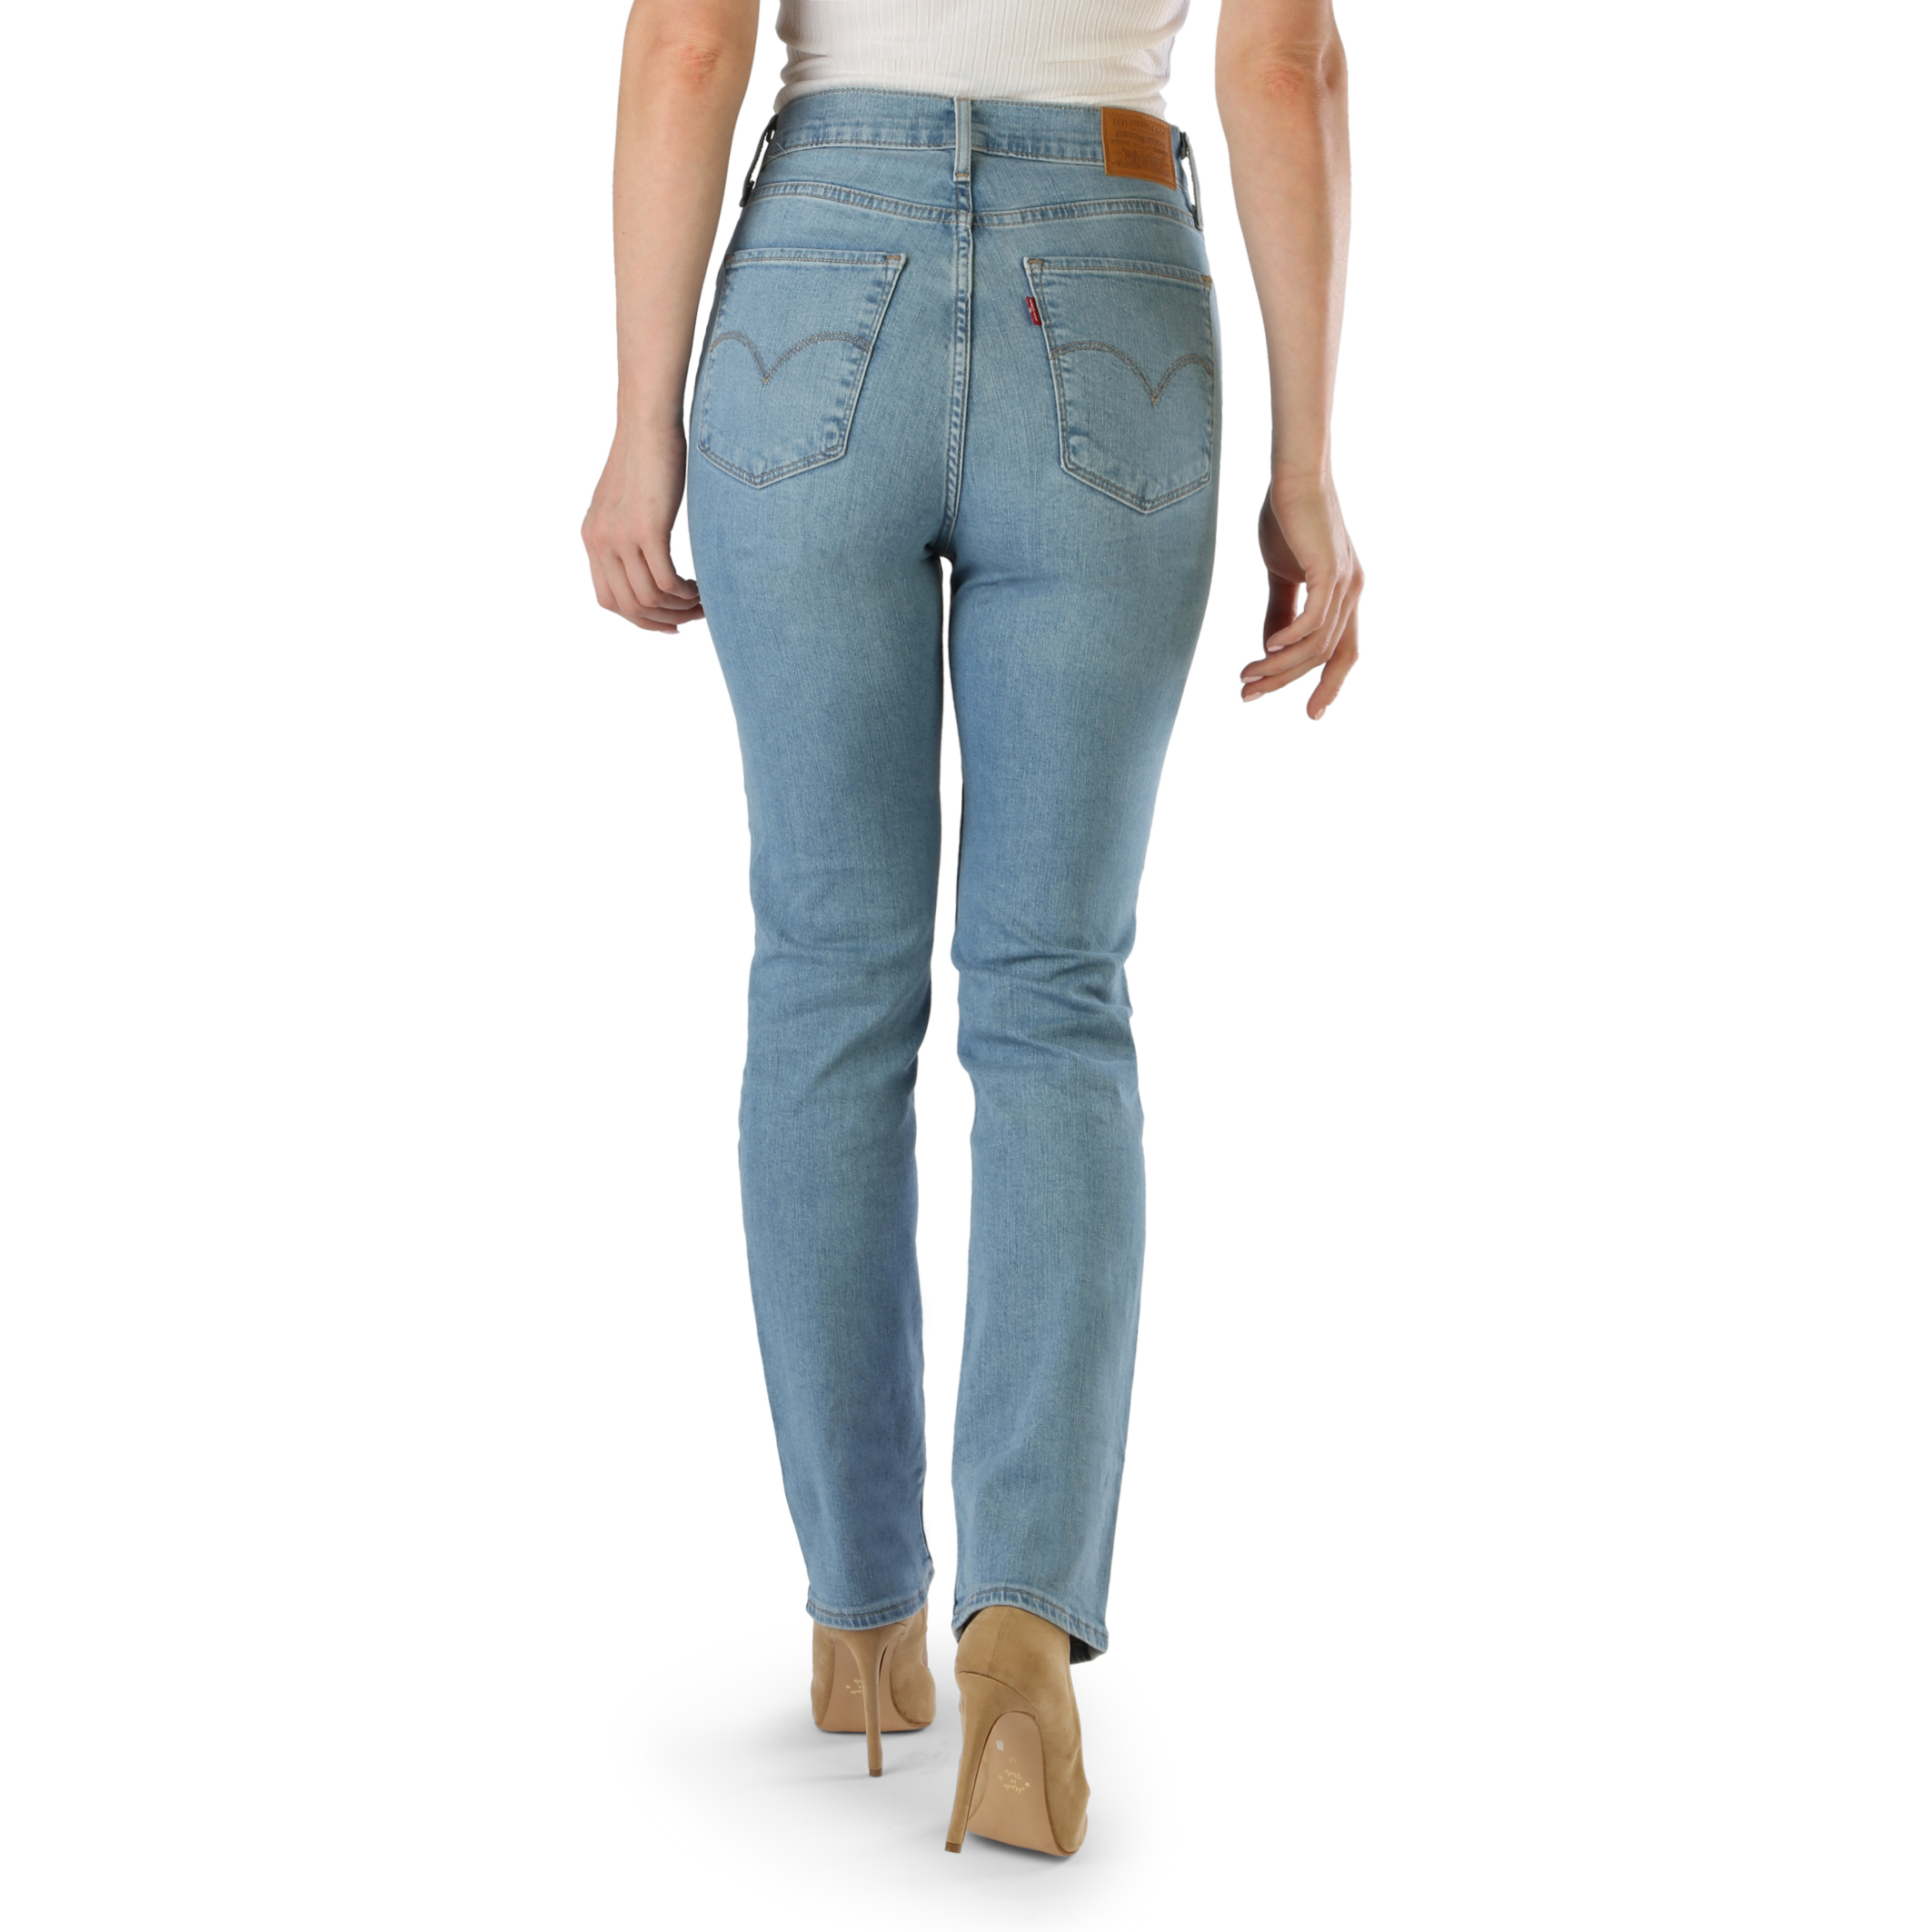 Levi's Blue Jeans for Women - 724_HIGH